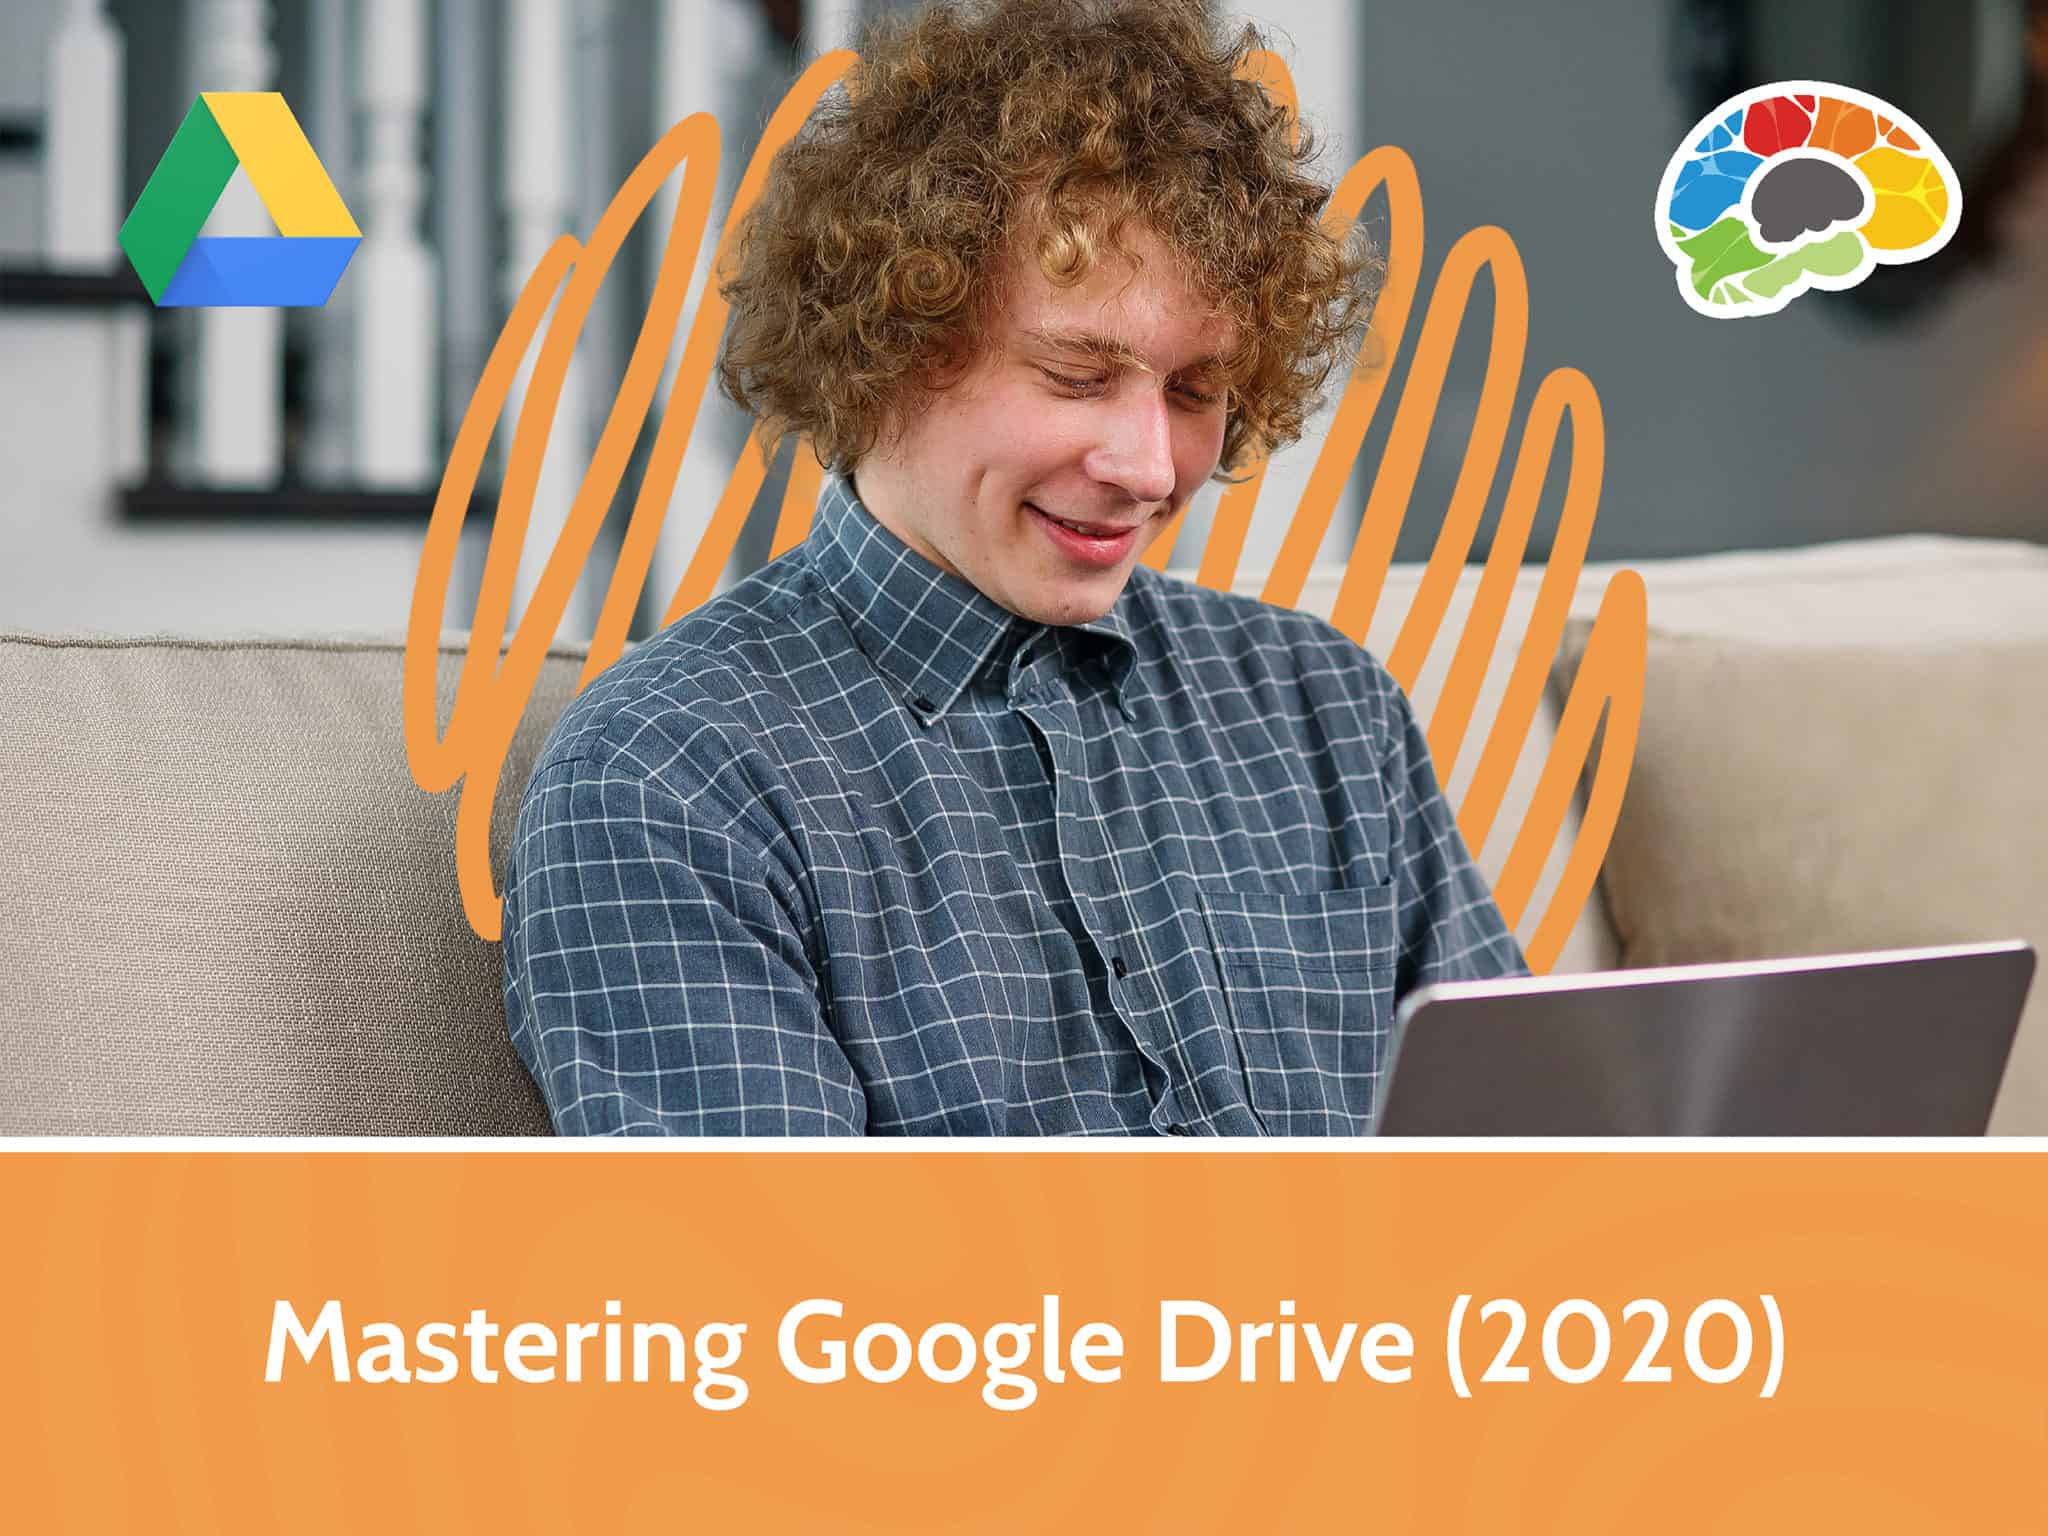 Mastering Google Drive 2020 scaled